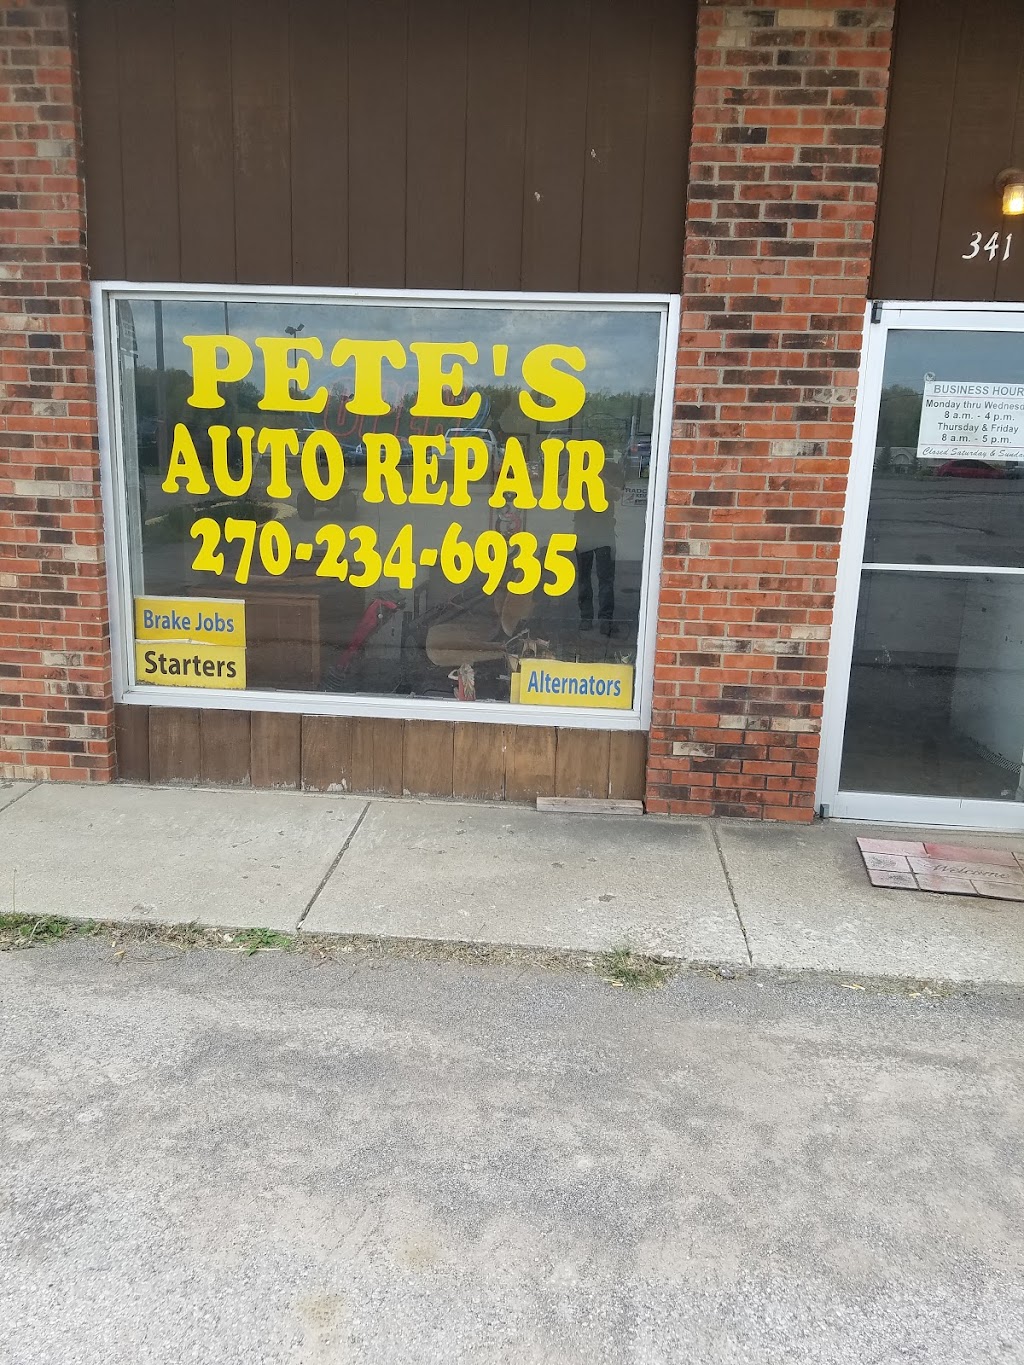 Petes Auto Repair | 287 South Wilson Road #341 Moving to, be behind, 287 S Wilson Rd #341, Radcliff, KY 40160, USA | Phone: (270) 234-6935